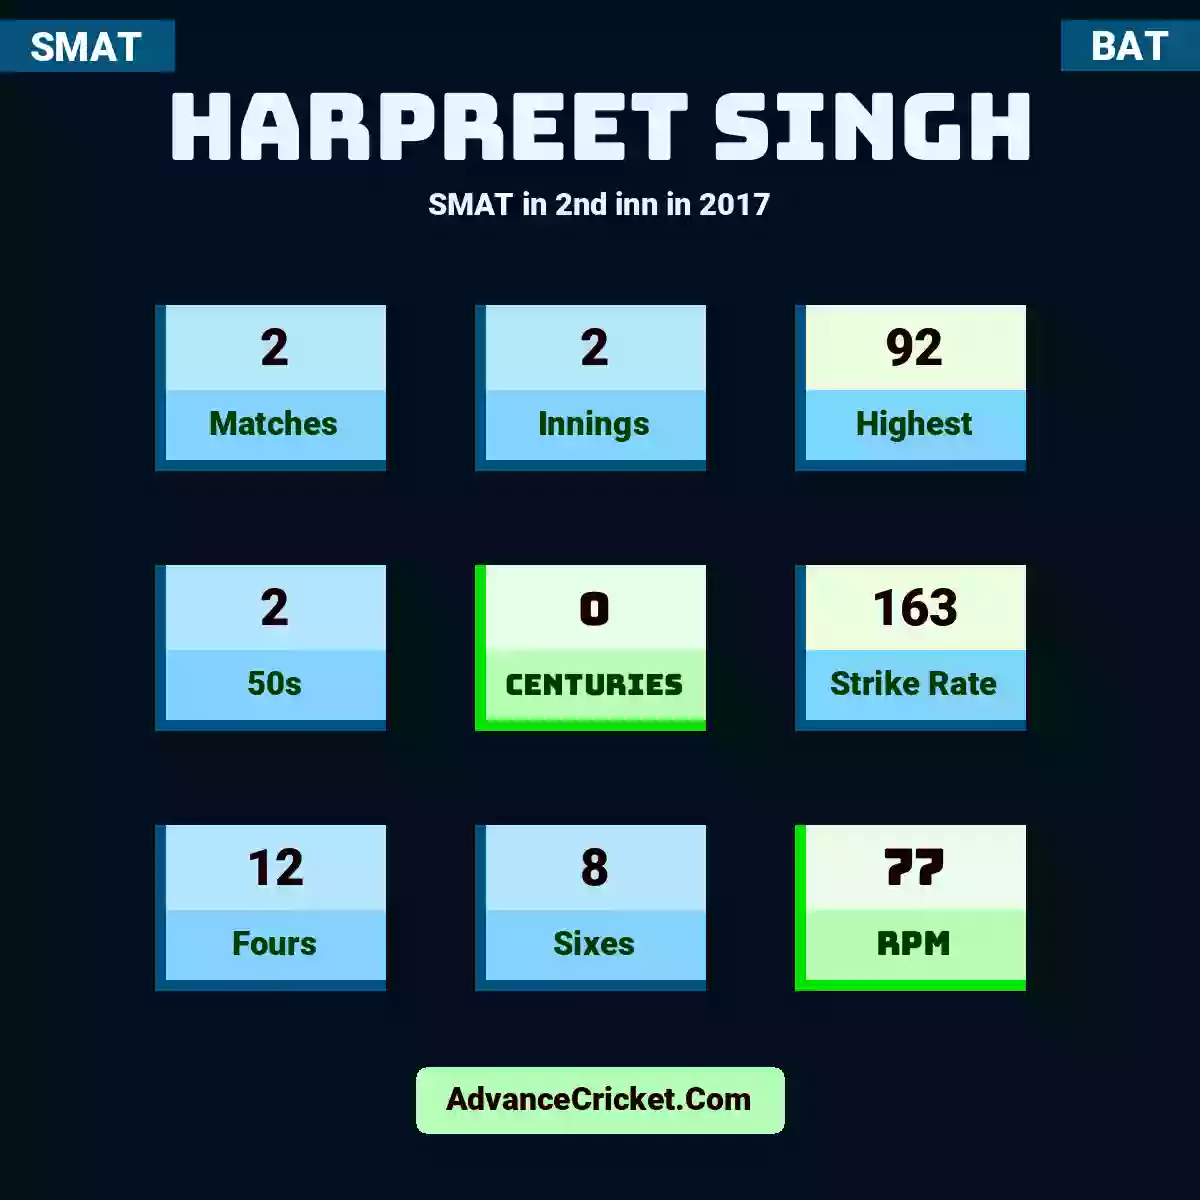 Harpreet Singh SMAT  in 2nd inn in 2017, Harpreet Singh played 2 matches, scored 92 runs as highest, 2 half-centuries, and 0 centuries, with a strike rate of 163. H.Singh hit 12 fours and 8 sixes, with an RPM of 77.